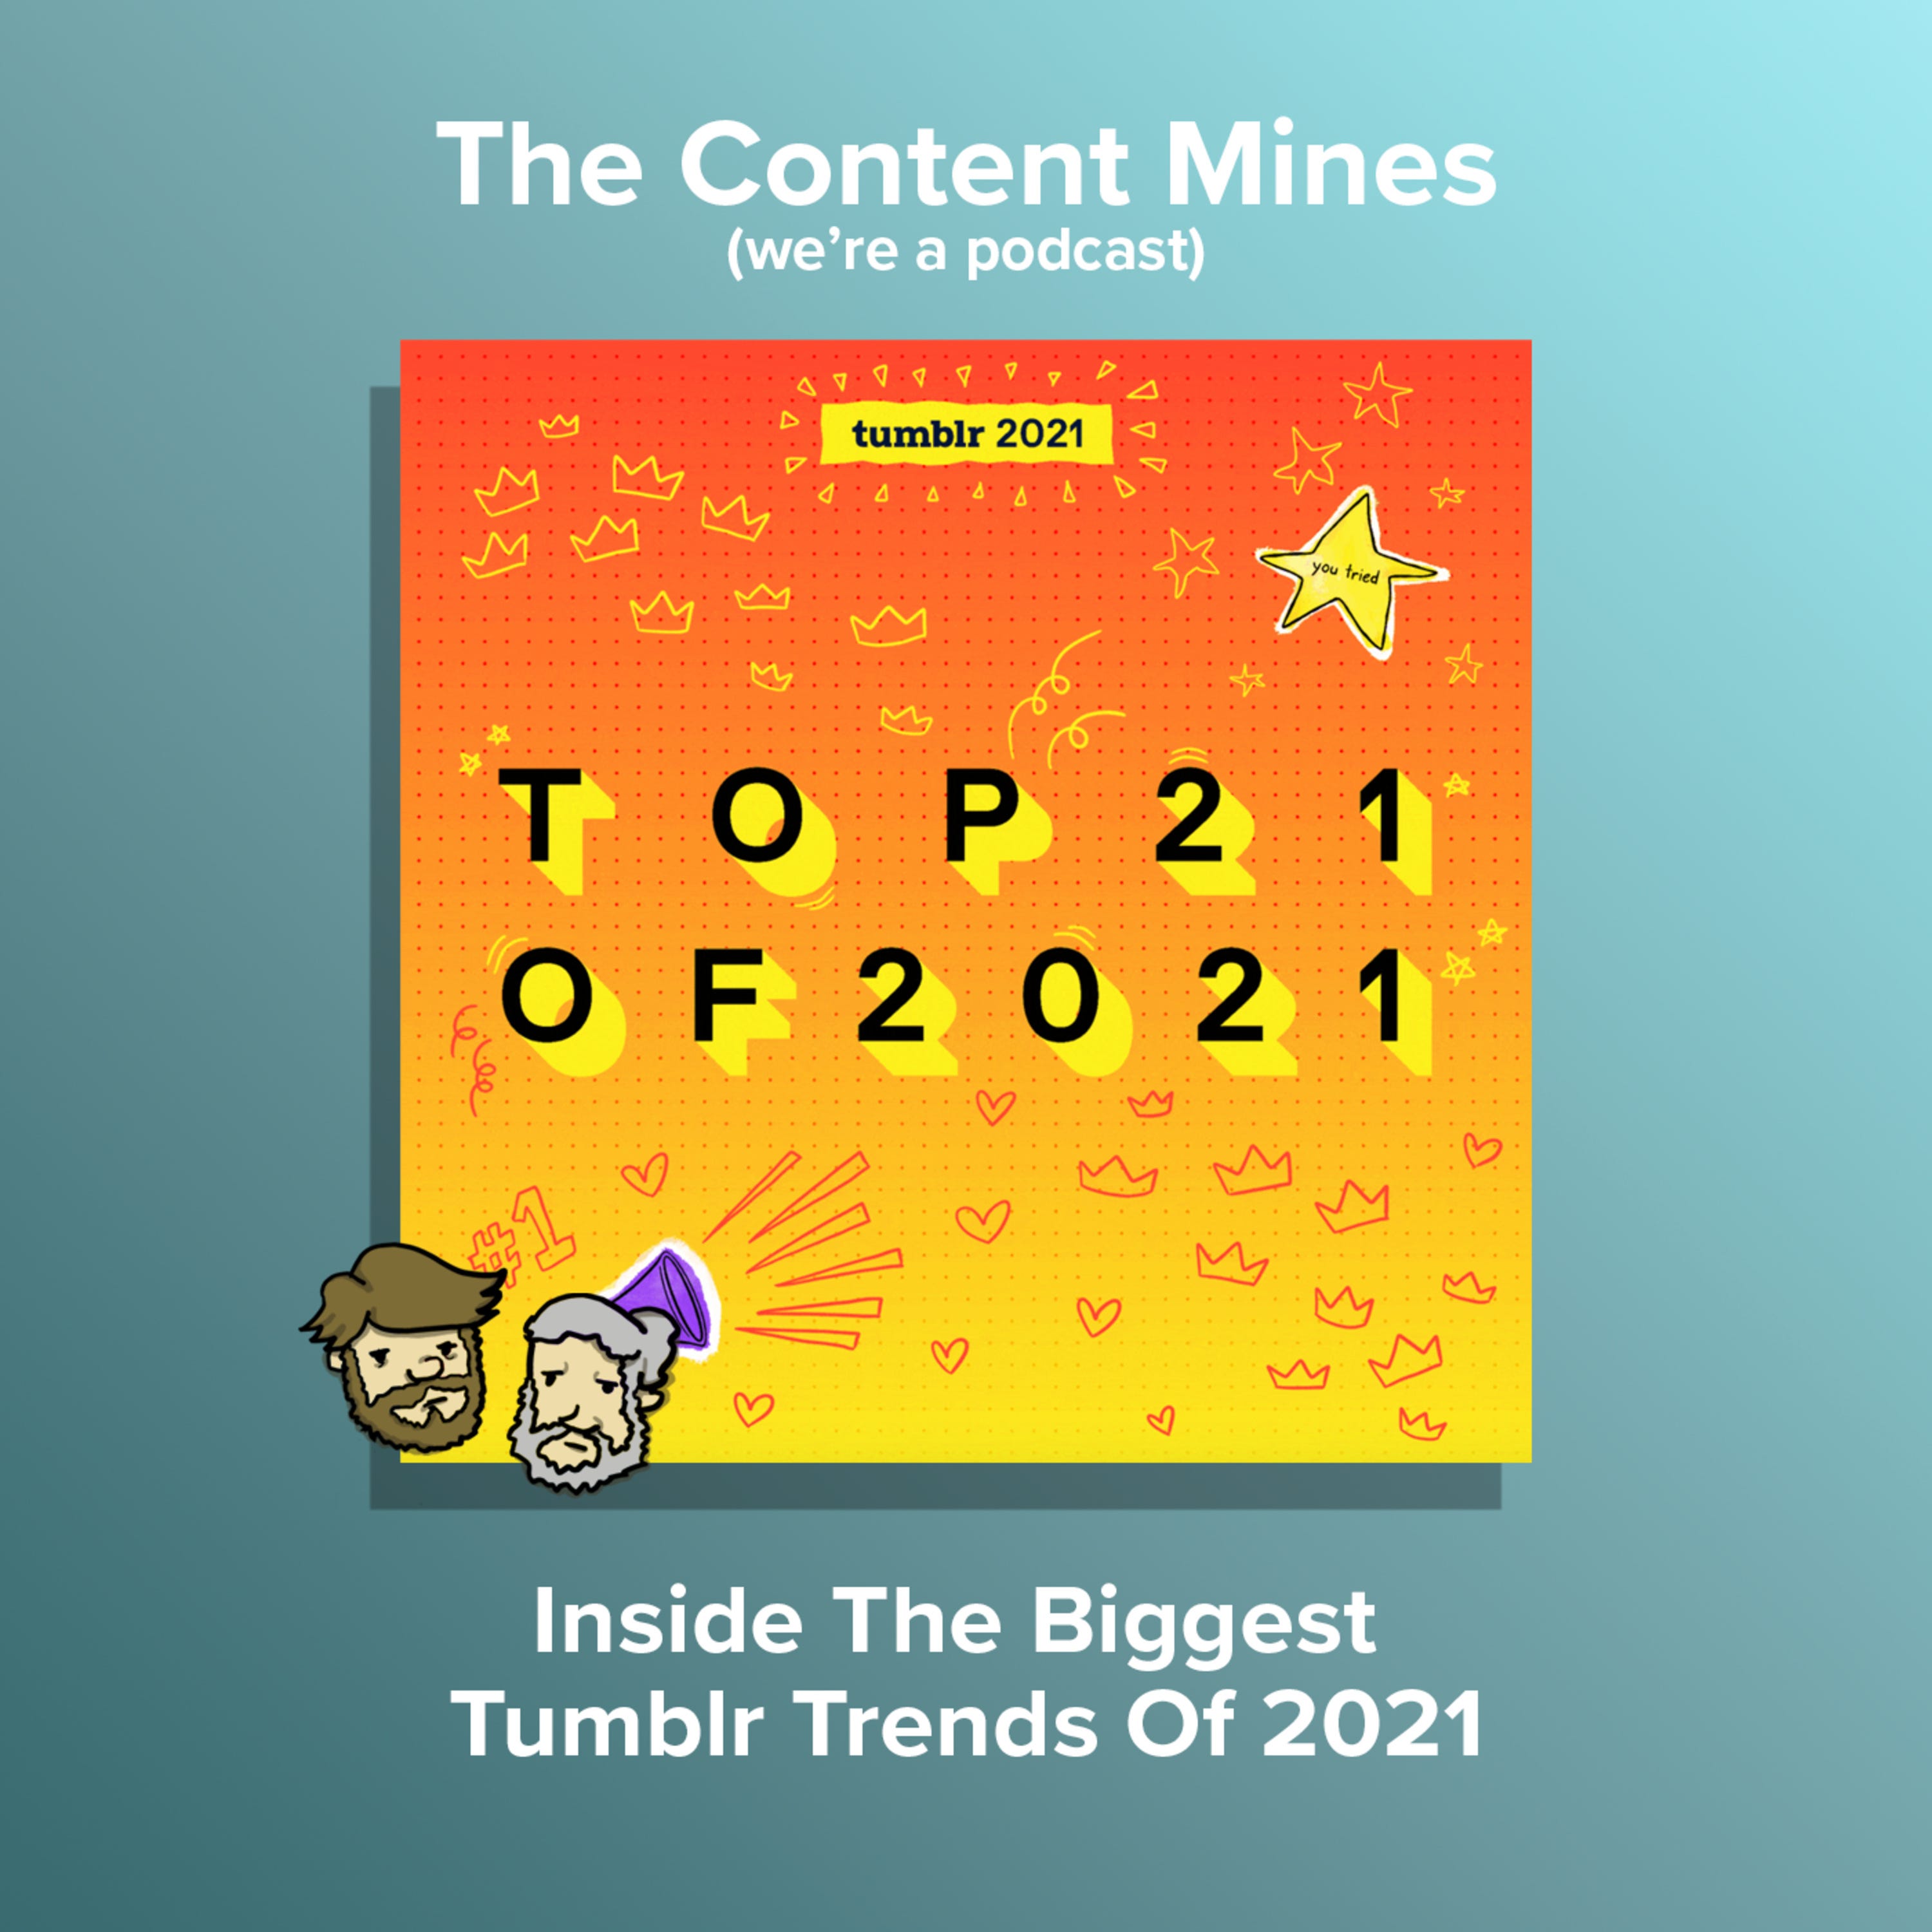 Inside The Biggest Tumblr Trends Of 2021